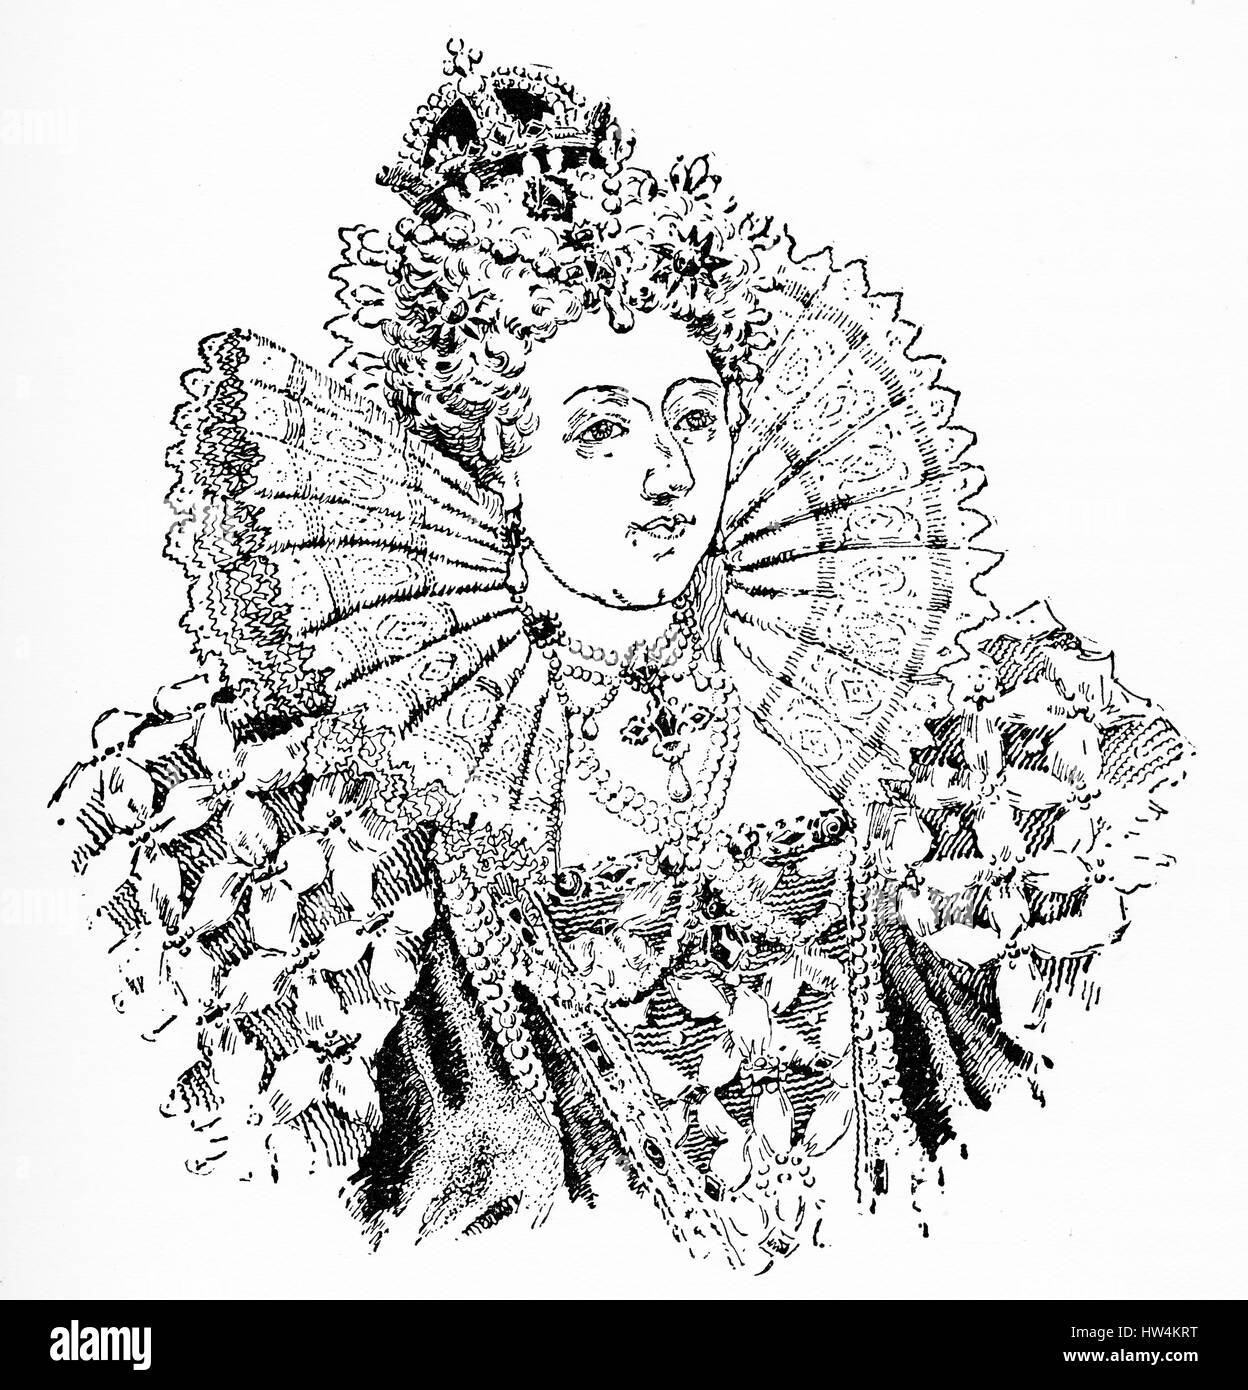 Engraving of Elizabeth I, queen of England. (1533-1603) From an original engraving in the Historian's History of the World, 1908 Stock Photo